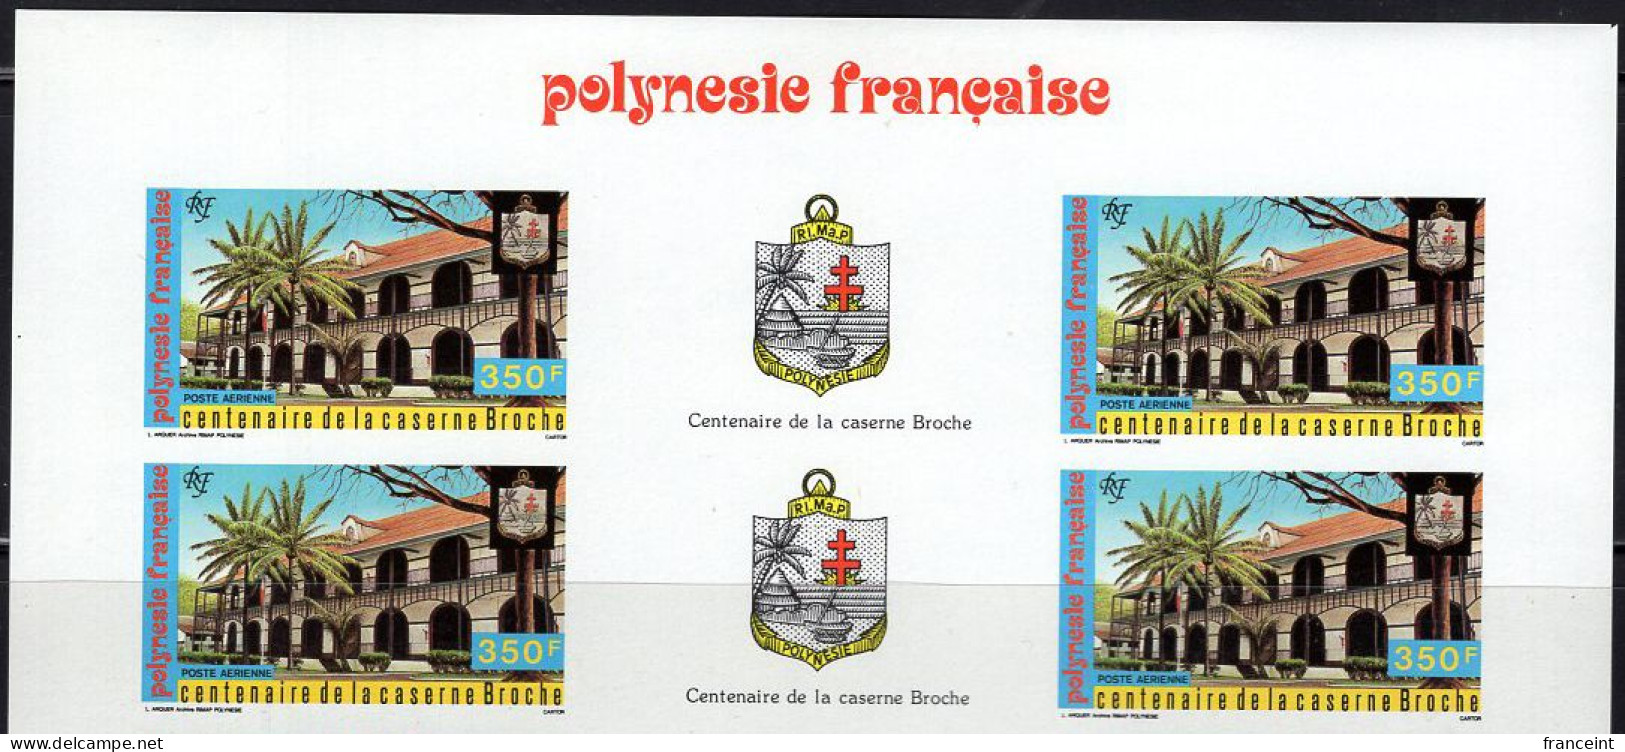 FRENCH POLYNESIA(1987) Broche Barracks. Imperforate Corner Block Of 4 With Gutter. Scott No C224, Yvert No PA196. - Imperforates, Proofs & Errors